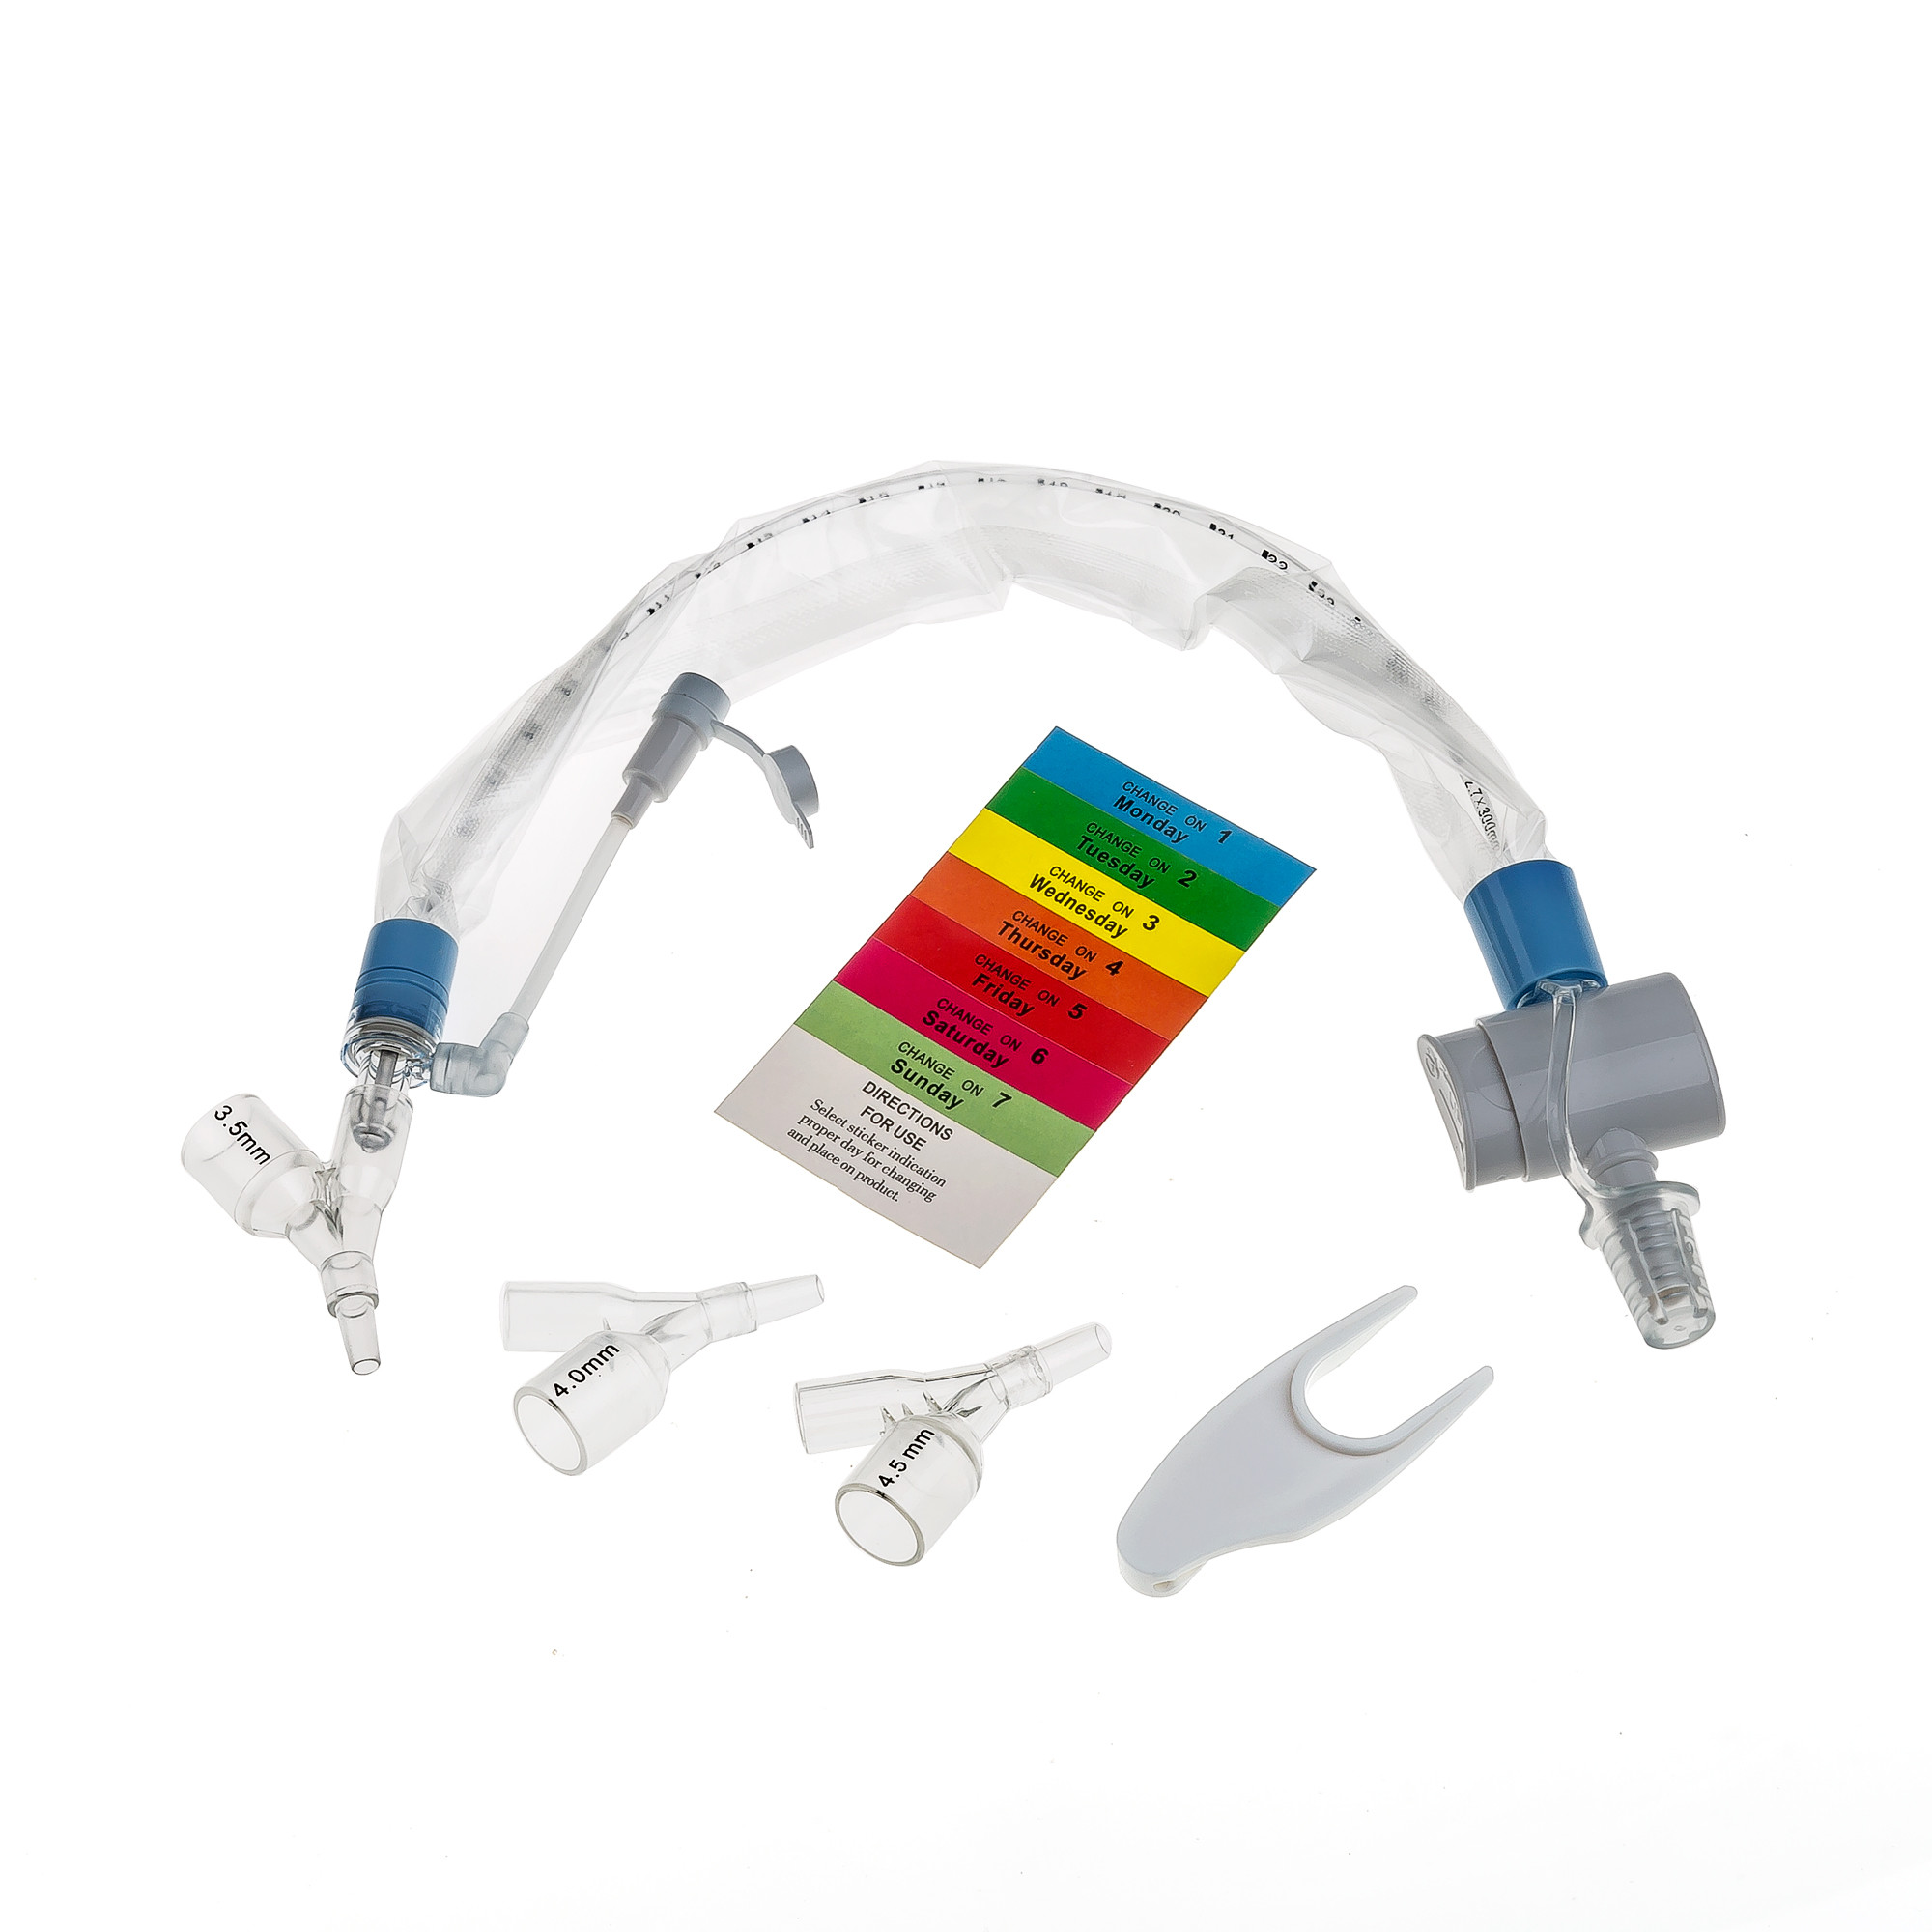  300mm Medical Closed System Suction Catheter 8fr With 3 Y Connectors Manufactures